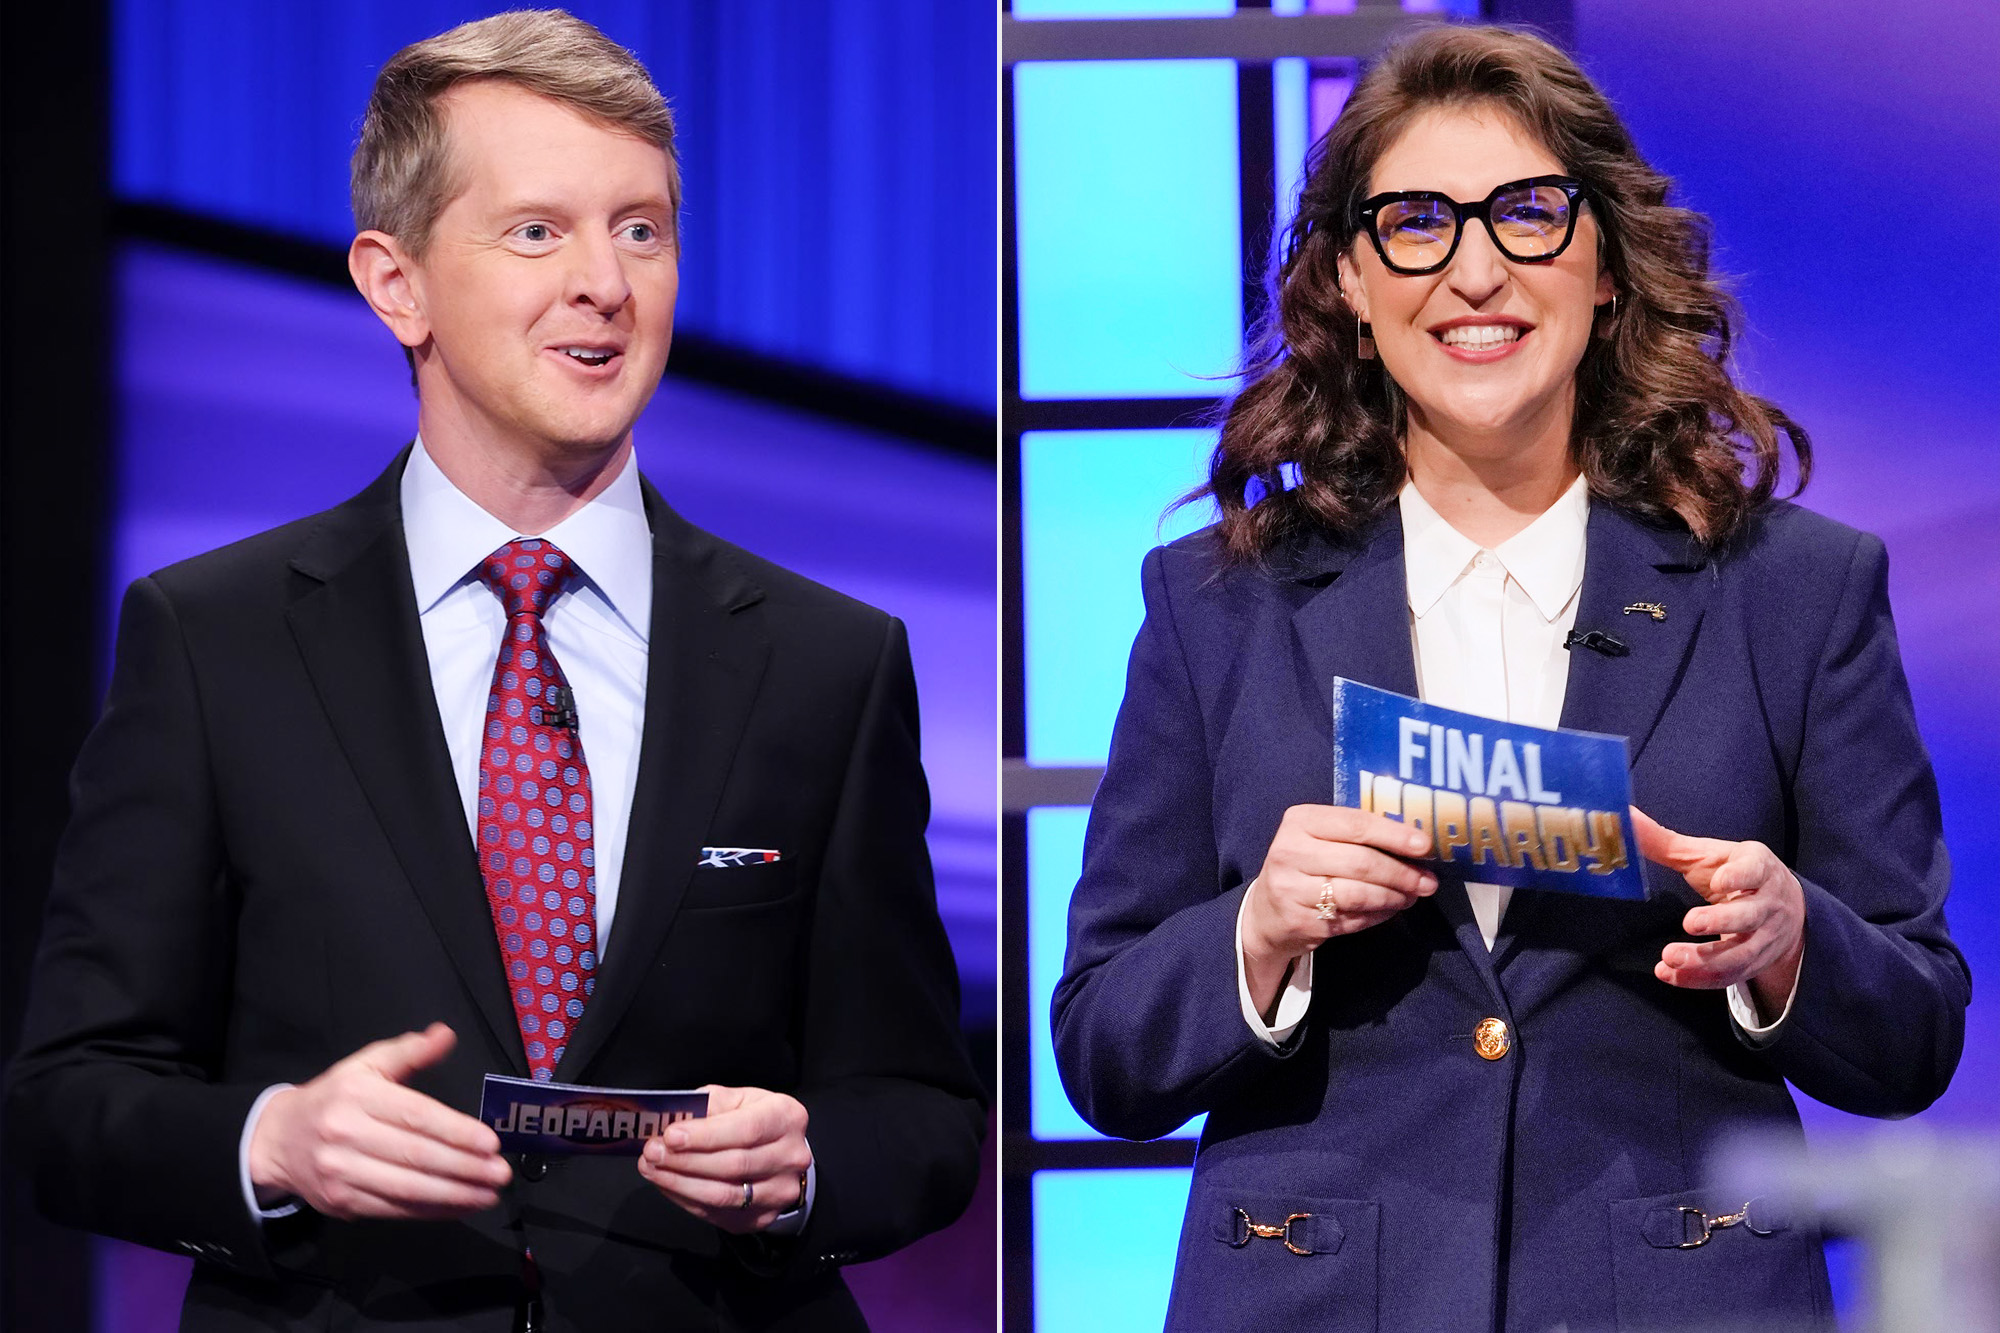 Ken Jennings hosting jeopardy Credit: courtesy Jeopardy Productions, Inc; JEOPARDY! NATIONAL COLLEGE CHAMPIONSHIP - "Jeopardy! National College Championship," hosted by Mayim Bialik, debuts TUESDAY, FEB. 8 on ABC. Produced by Sony Pictures Television, "Jeopardy! National College Championship" is a multiconsecutive-night event that features 36 students from 36 colleges and universities from across the country, battling head-to-head for nine days of intense competition. (Casey Durkin/ABC via Getty Images) MAYIM BIALIK